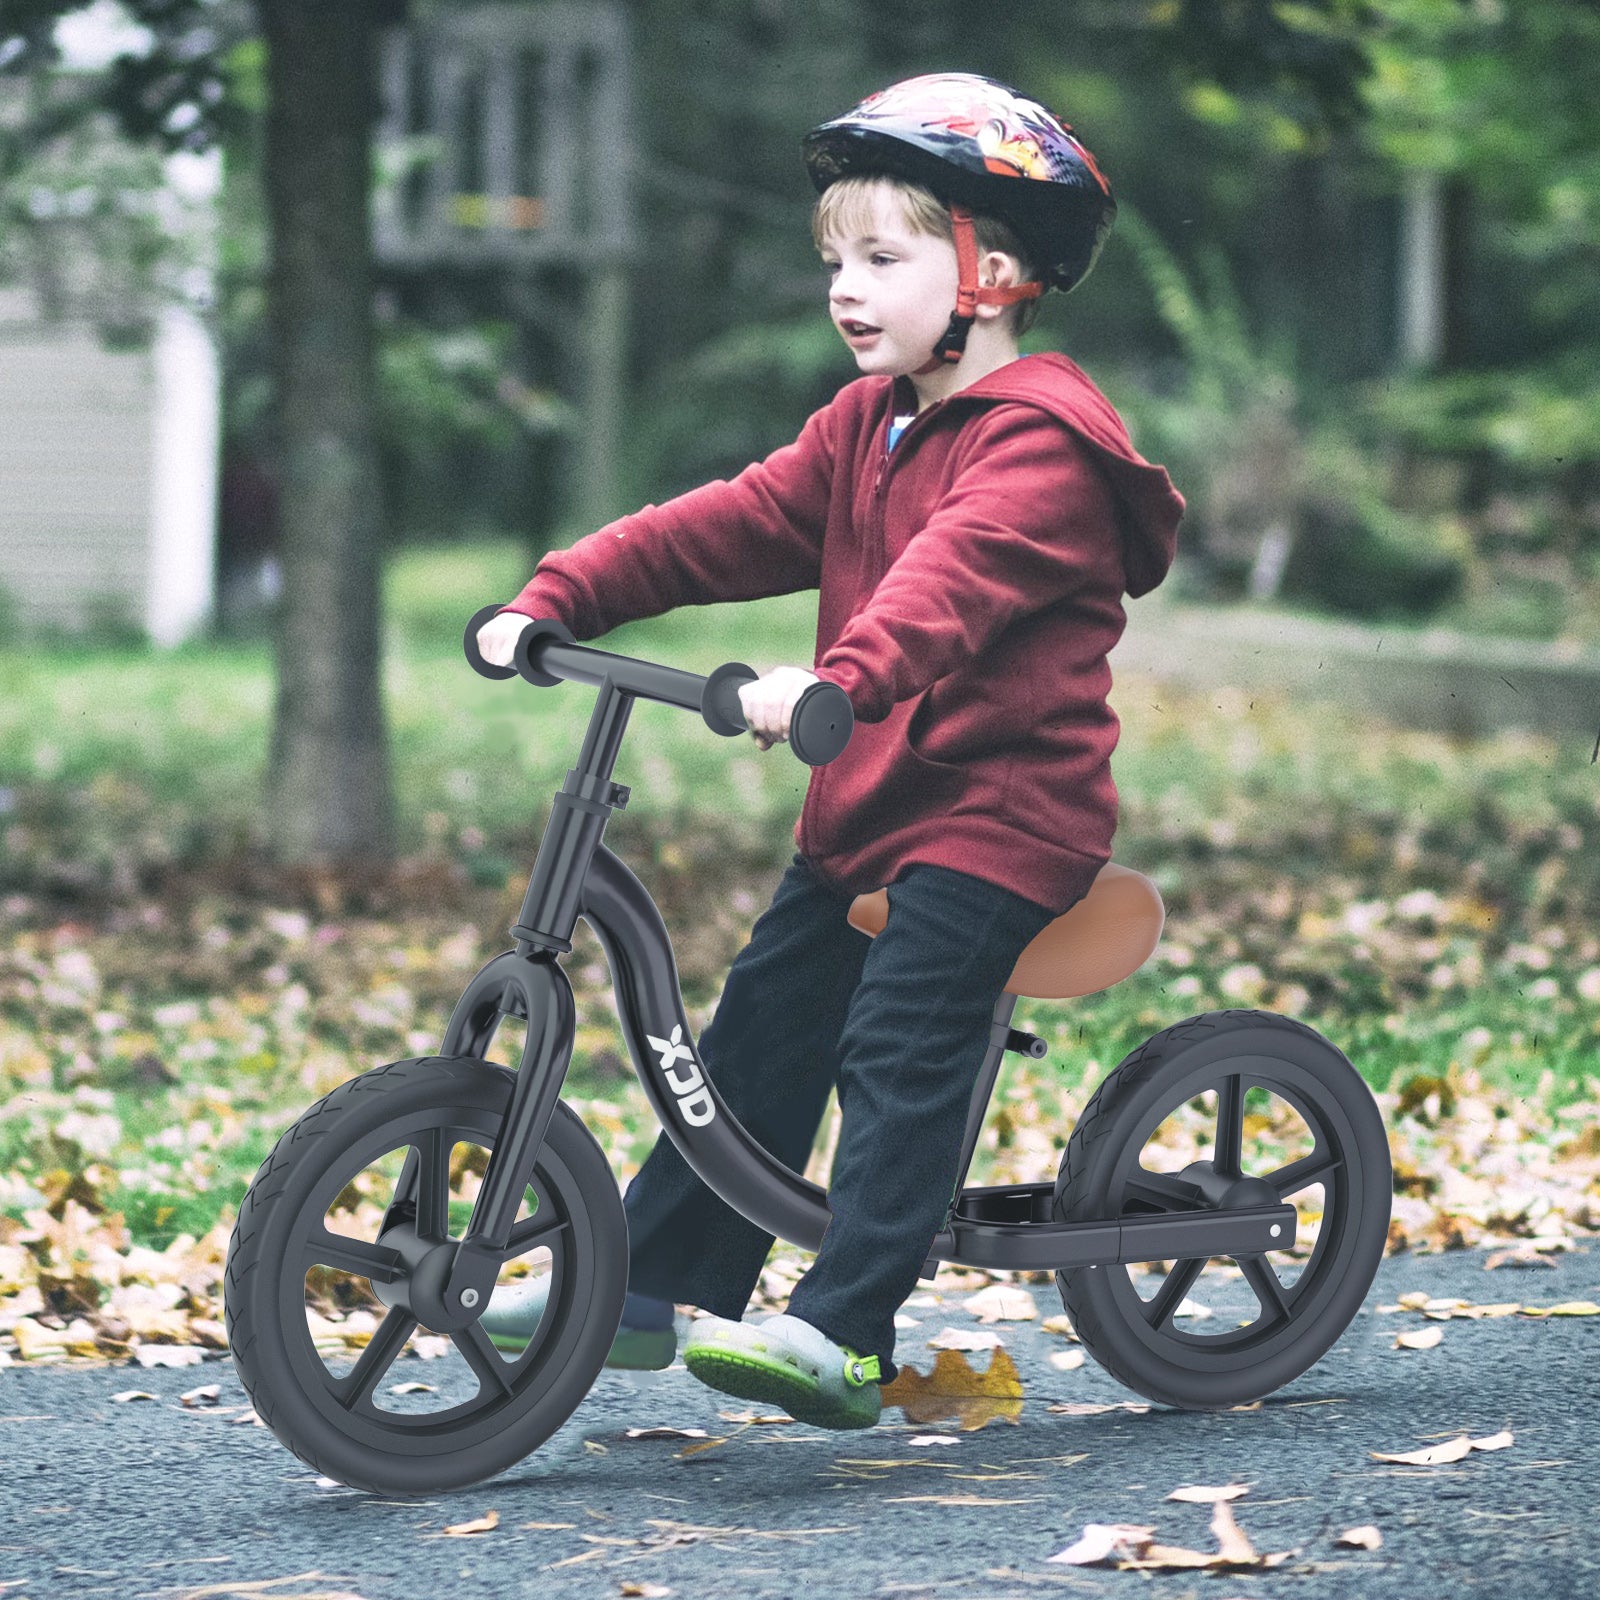 Pedal into Joy: Why the Toddler Balance Bike is the Perfect Gift for Your Little Adventurer!